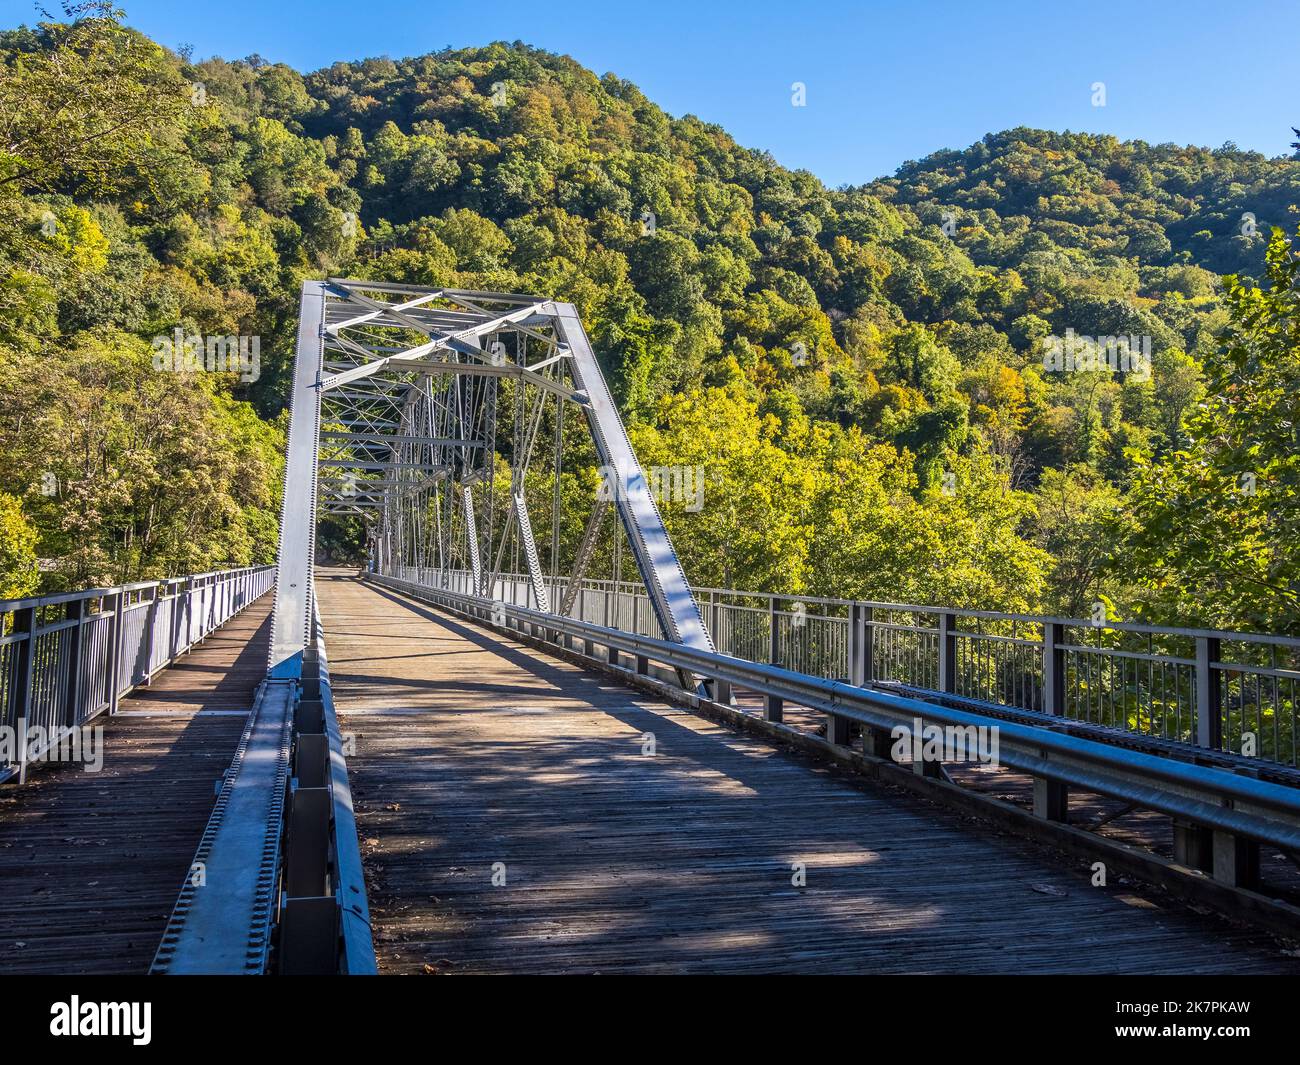 Fayette Station Bridge over the New River in the New River Gorge National Park and Preserve in West Virginia USA Stock Photo